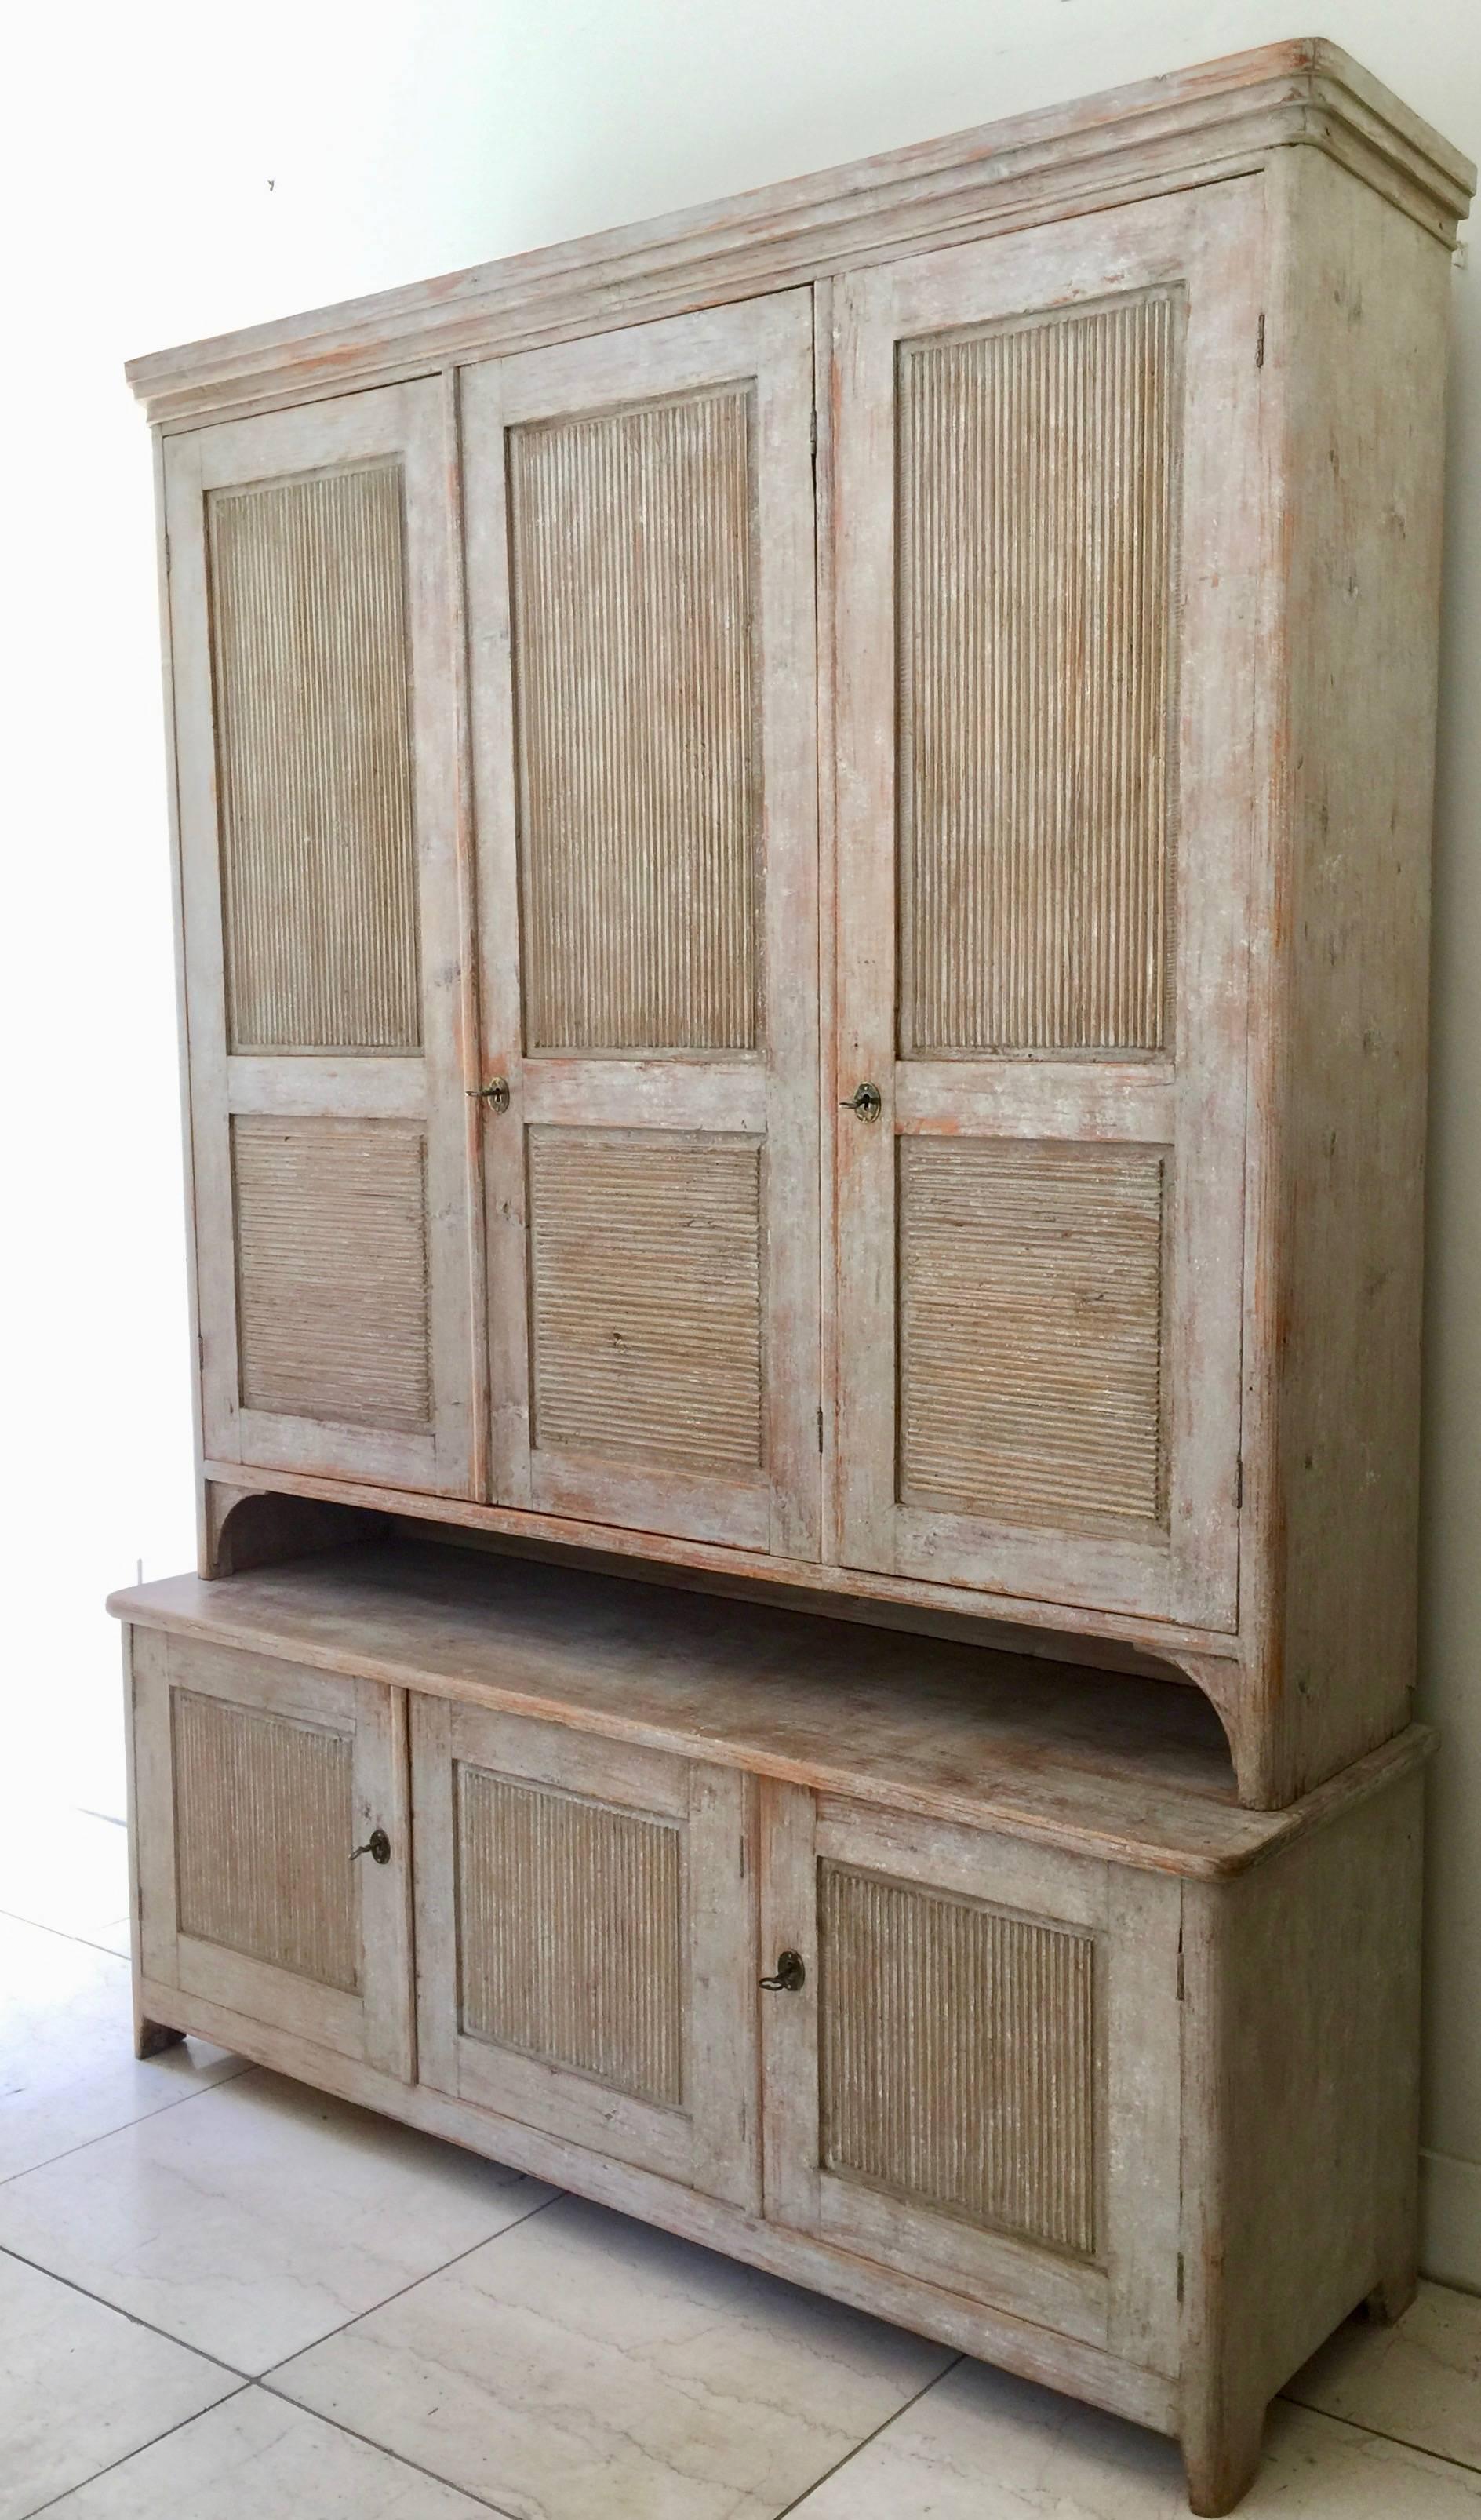 An exquisite and large, period Swedish Gustavian cabinet, in two parts displays Classic Gustavian styling with six reeded door panels in wonderful worn cream white patina scraped back to its original paint. Very practical with plenty of